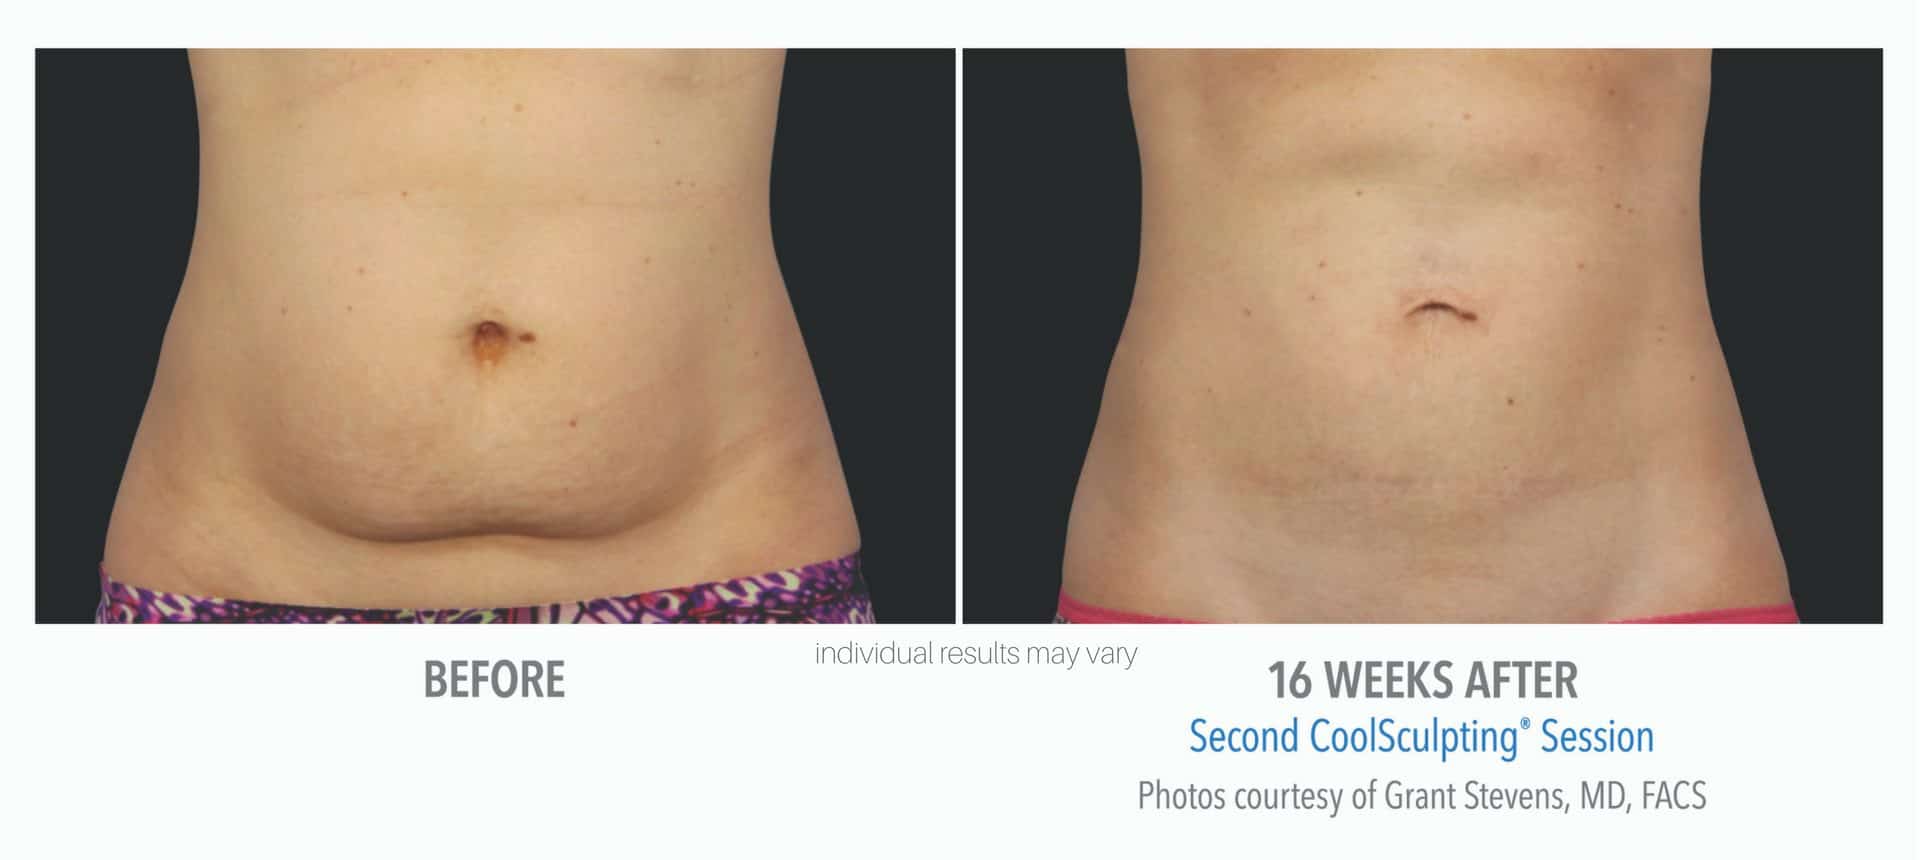 Woman's abdomen before and after coolsculpting treatment.